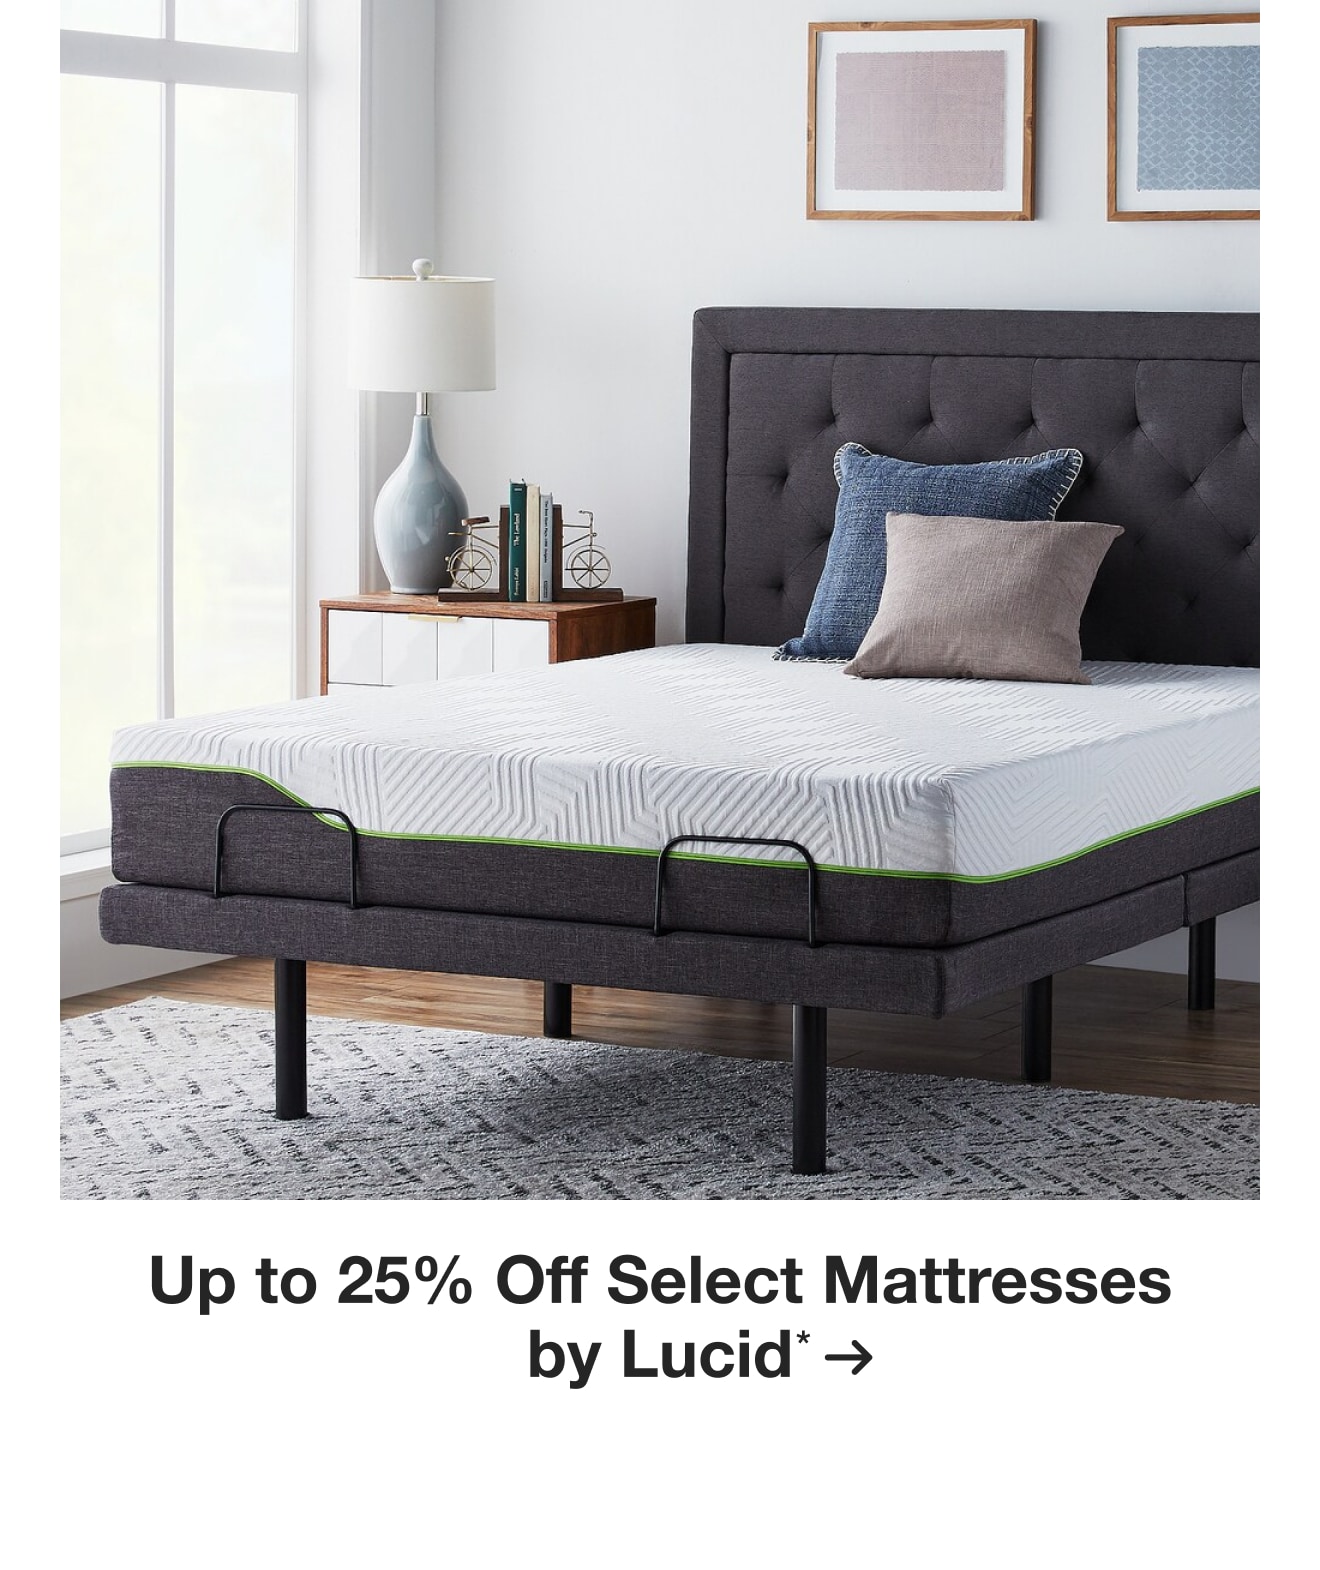 Up to 25% Off Select Mattresses by Lucid*